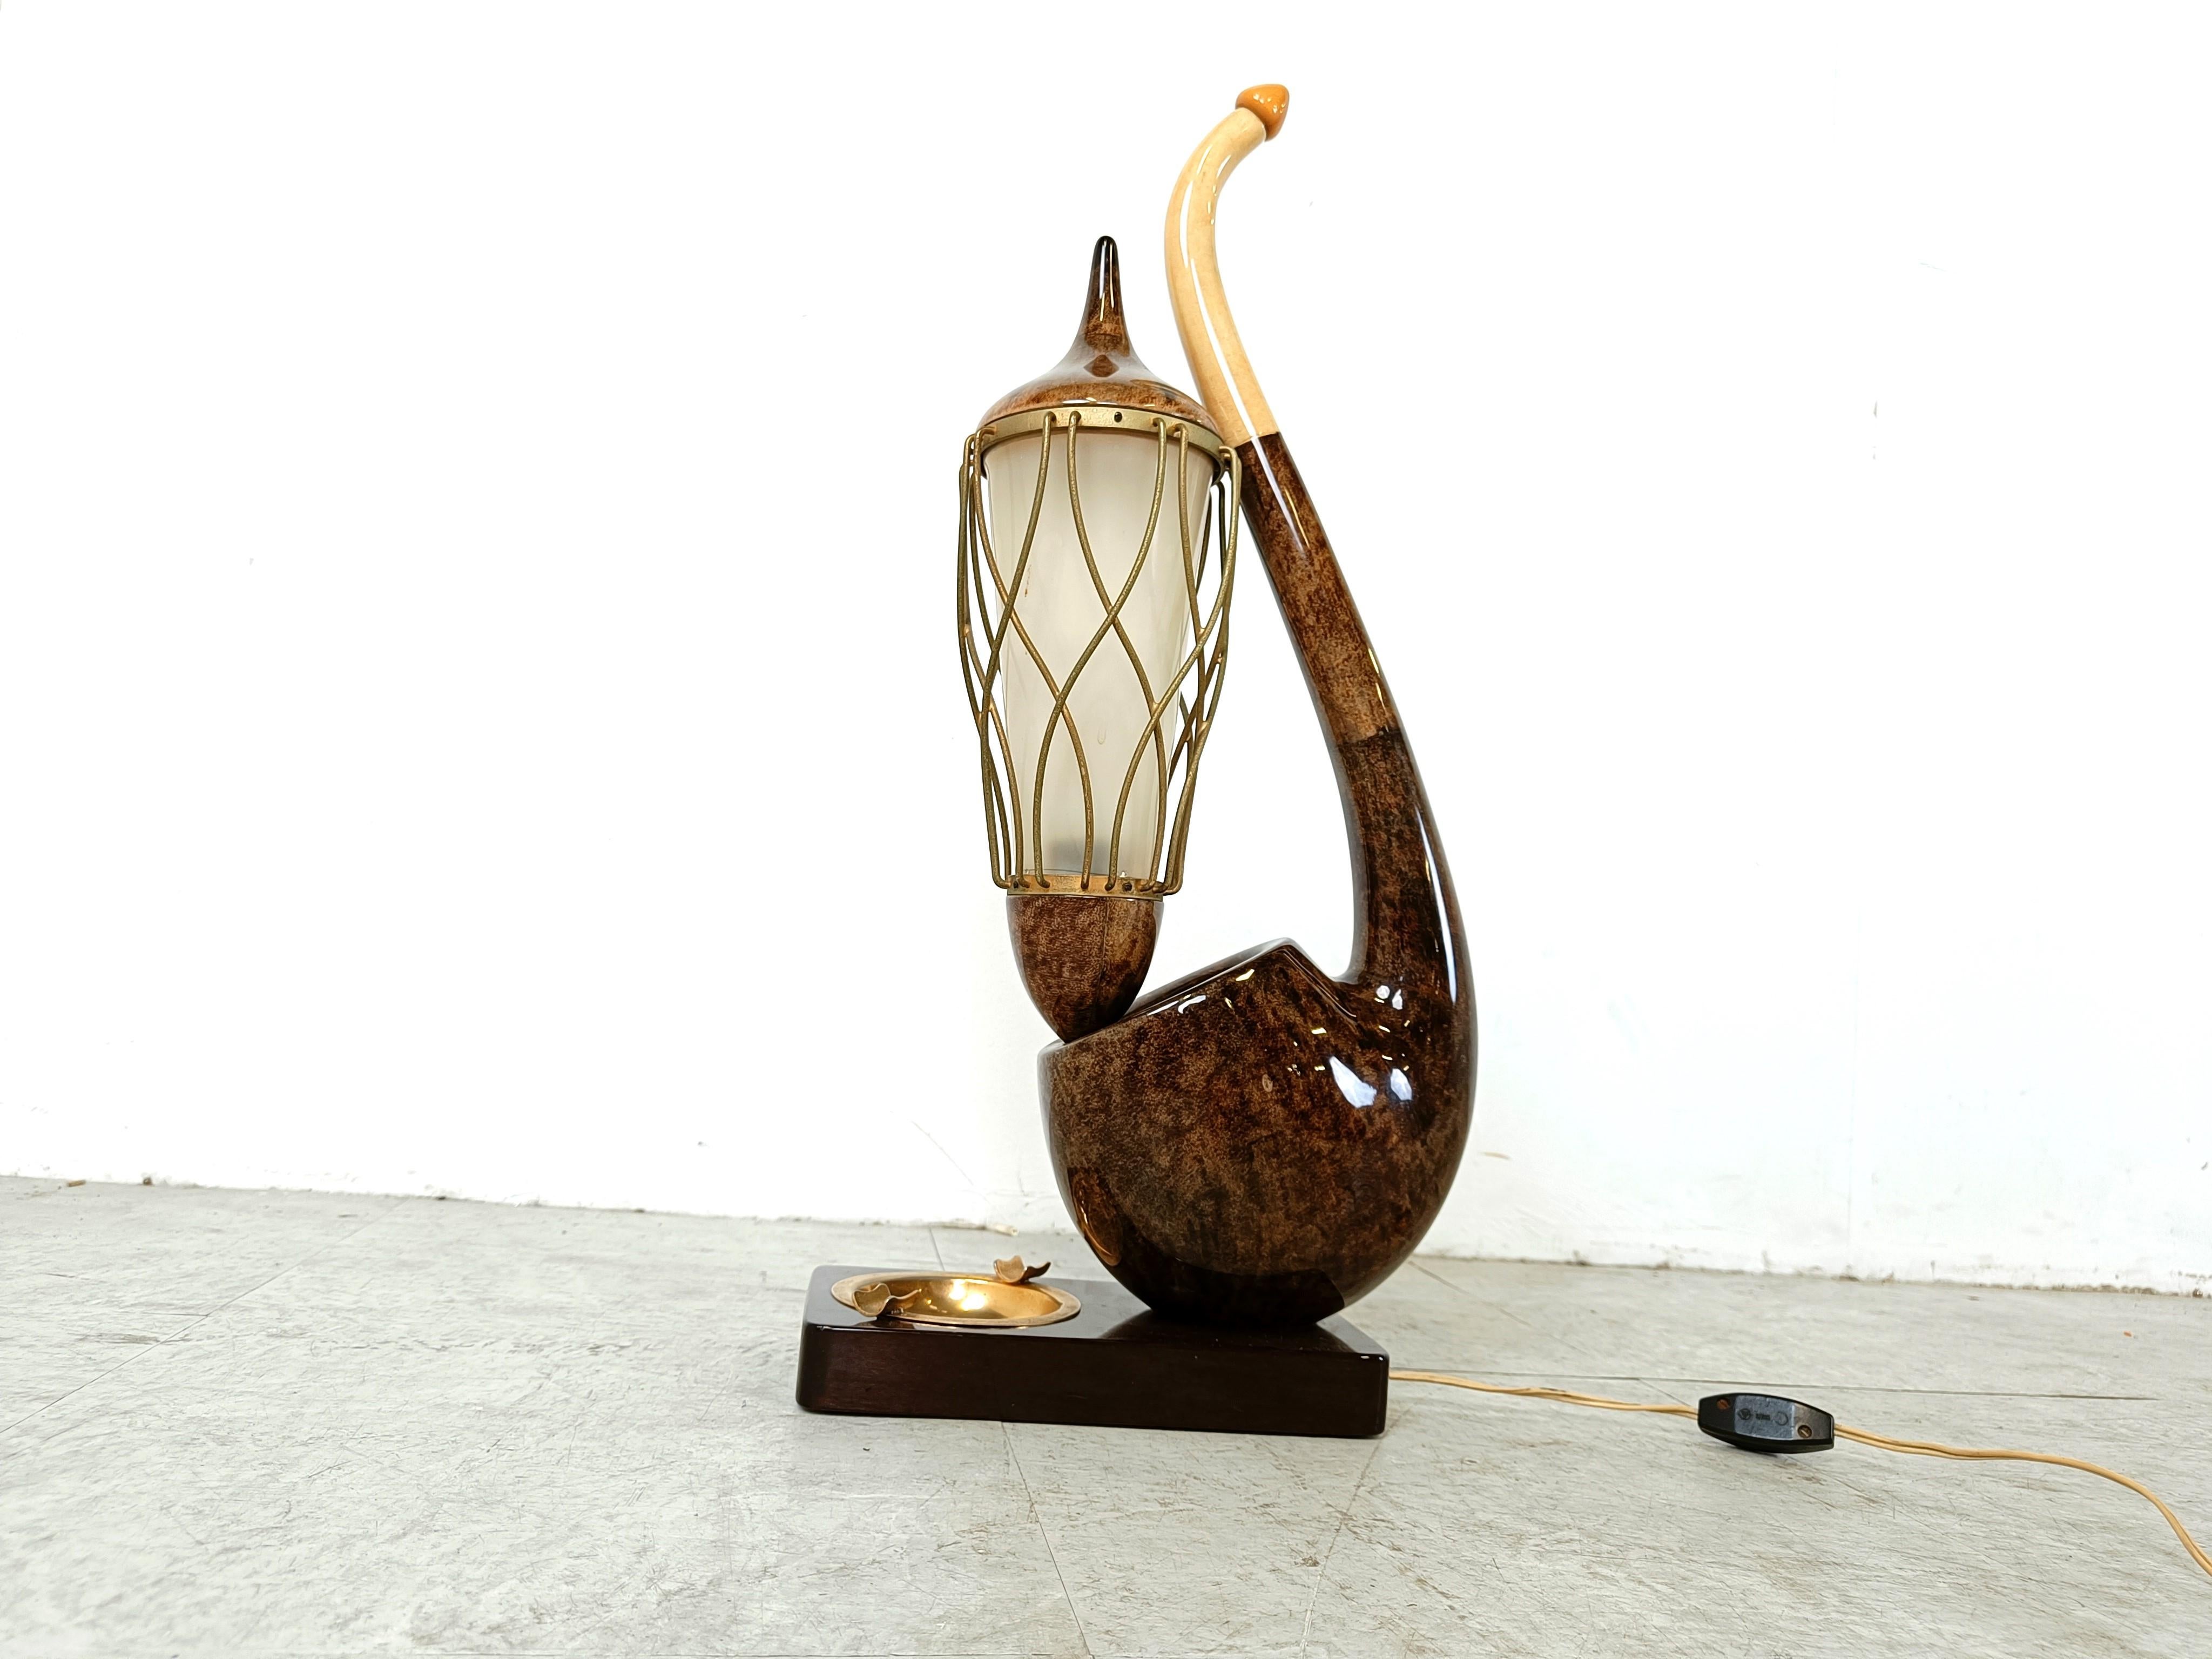 Rare mid century modern table lamp by Aldo Tura shaped like a pipe with a caged torch lamp and a plastic lamp shade.

it also has a brass ashtray embedded in the base of the lamp.

Made from beige and brown lacquered goatskin.

Labelled under the